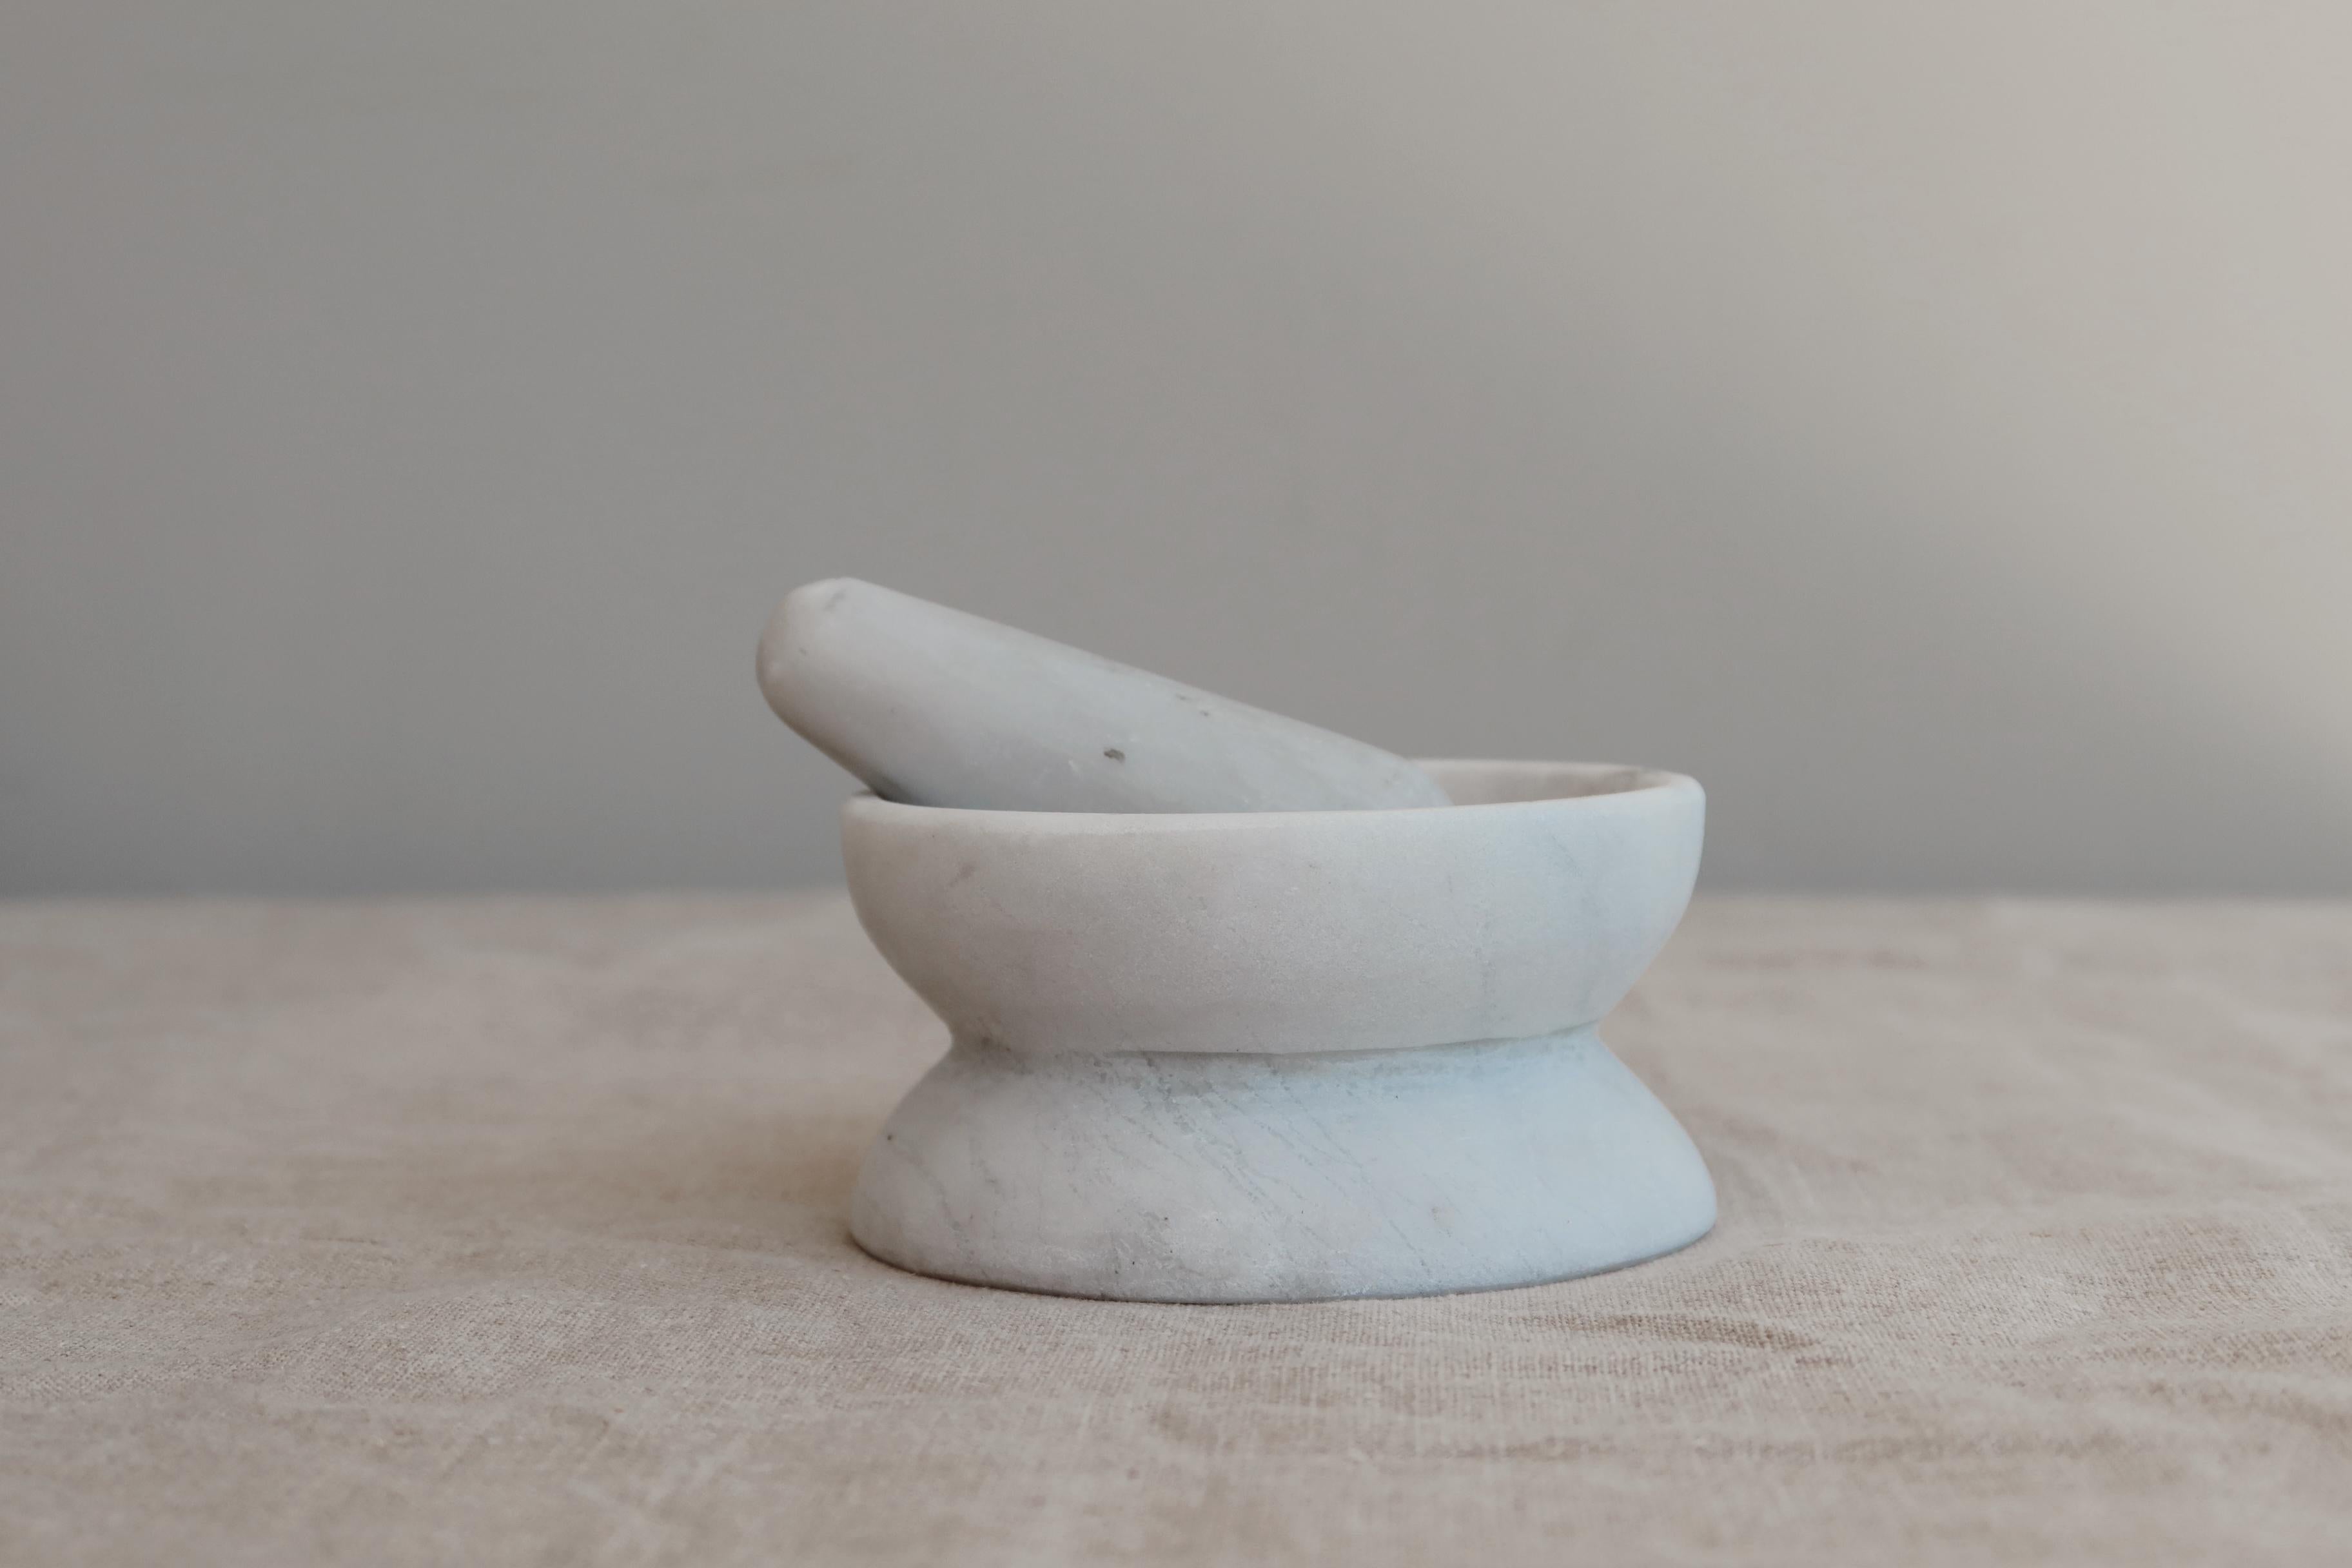 The small Mexican molcajete, exquisitely handcrafted from locally sourced marbles like travertine marble, white Veneciano marble, black Queretaro marble, and gray Santo Tomas marble, is specifically designed for grinding and blending spices such as